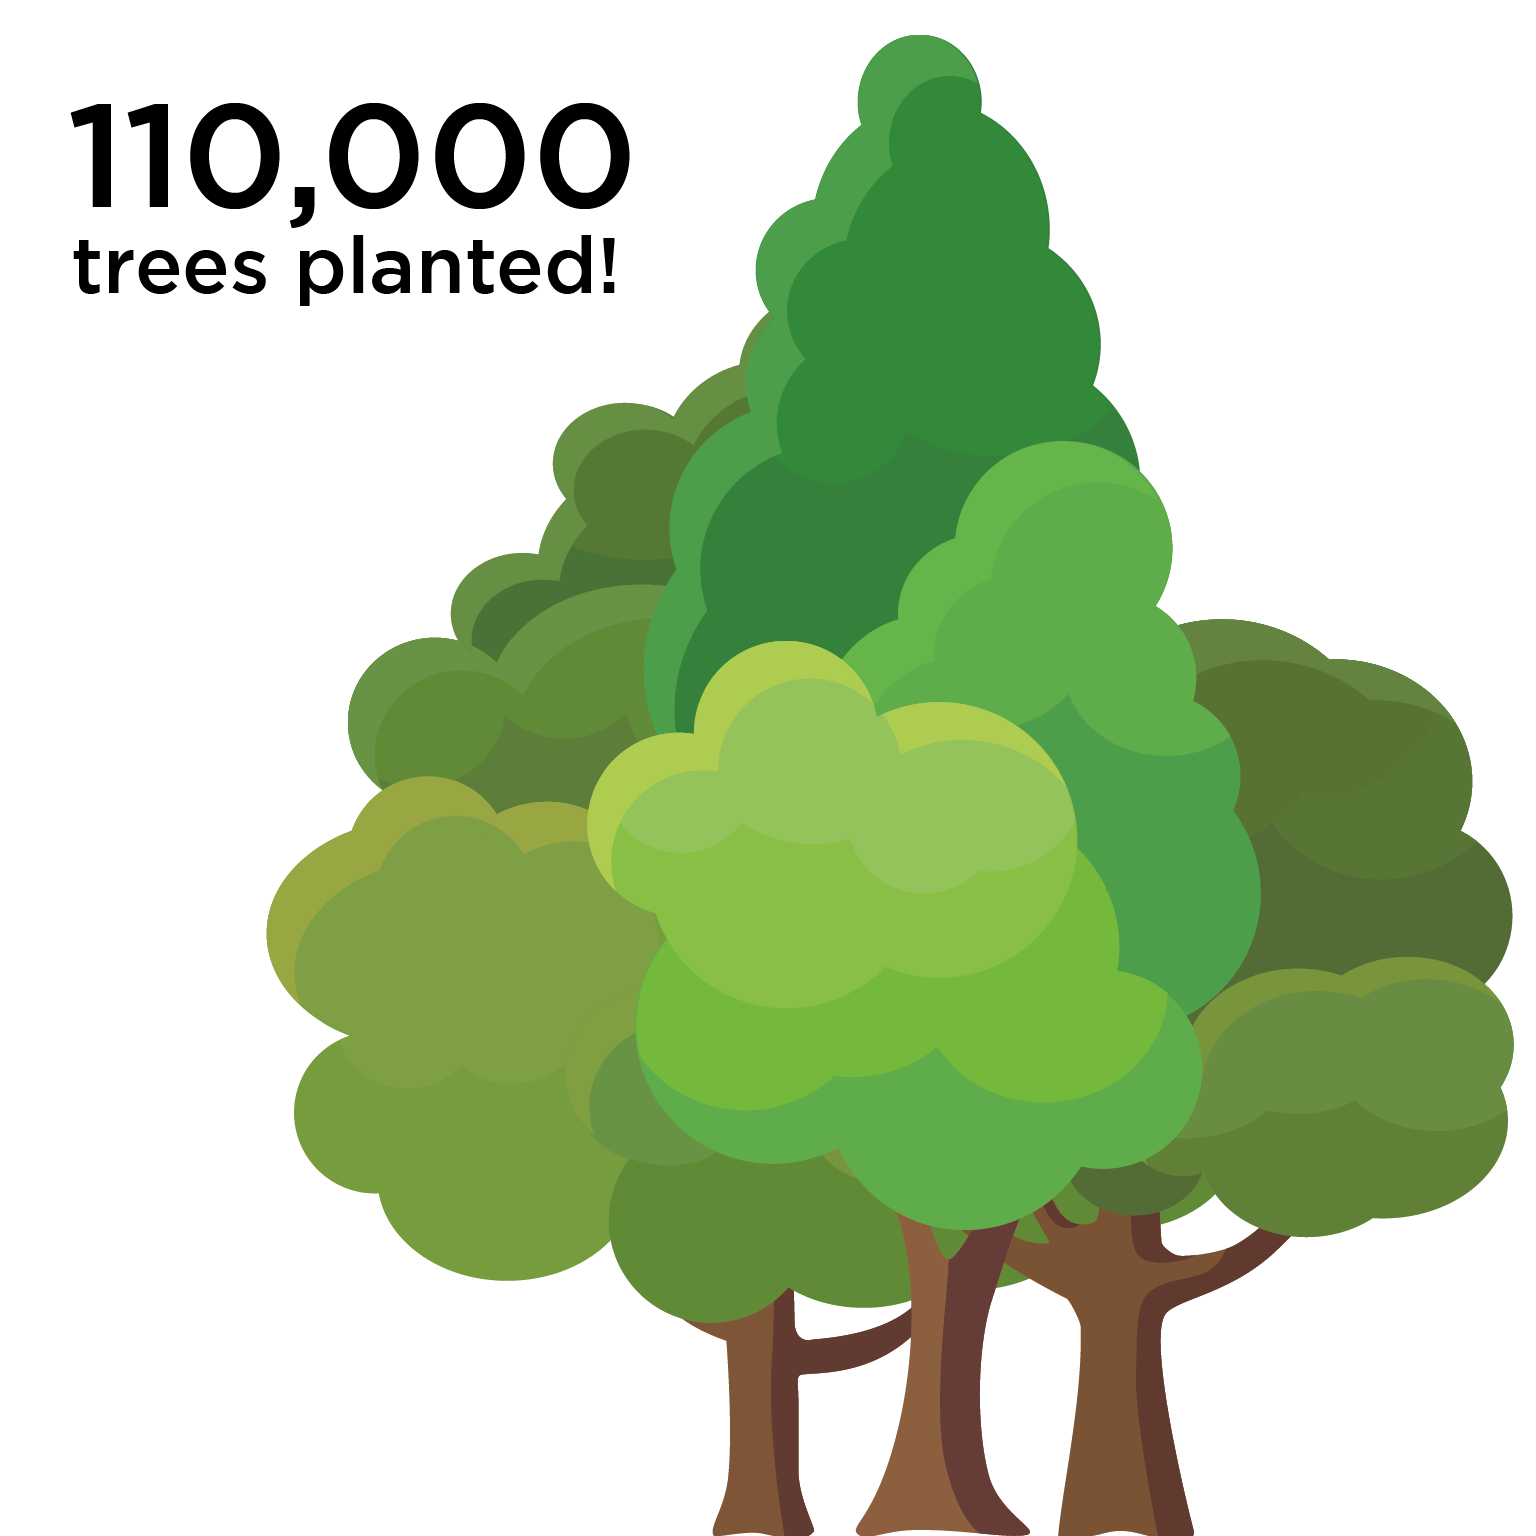 110,000 trees planted